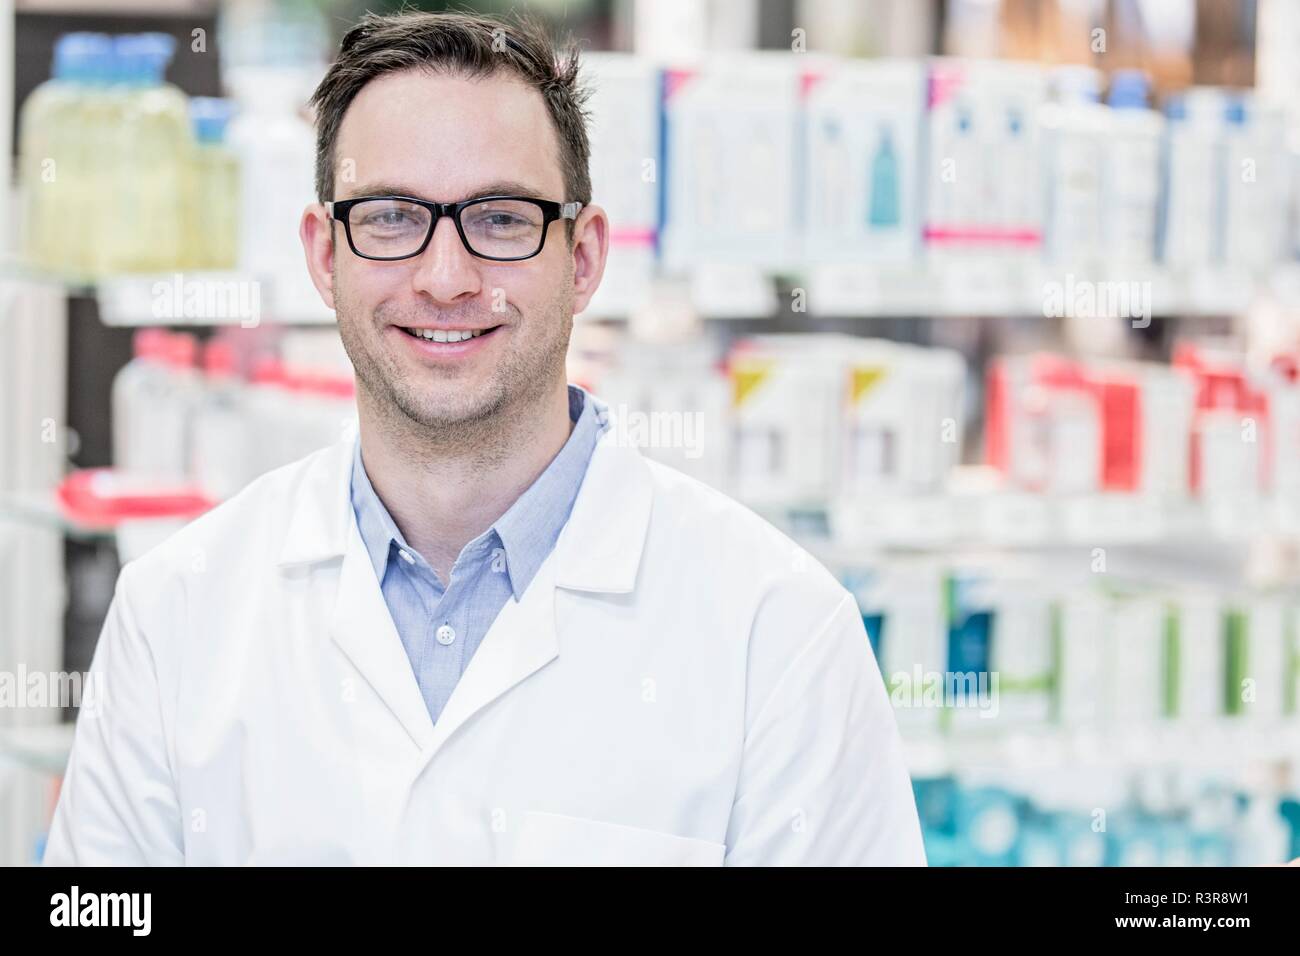 Portrait of young male pharmacist standing in pharmacy. Stock Photo